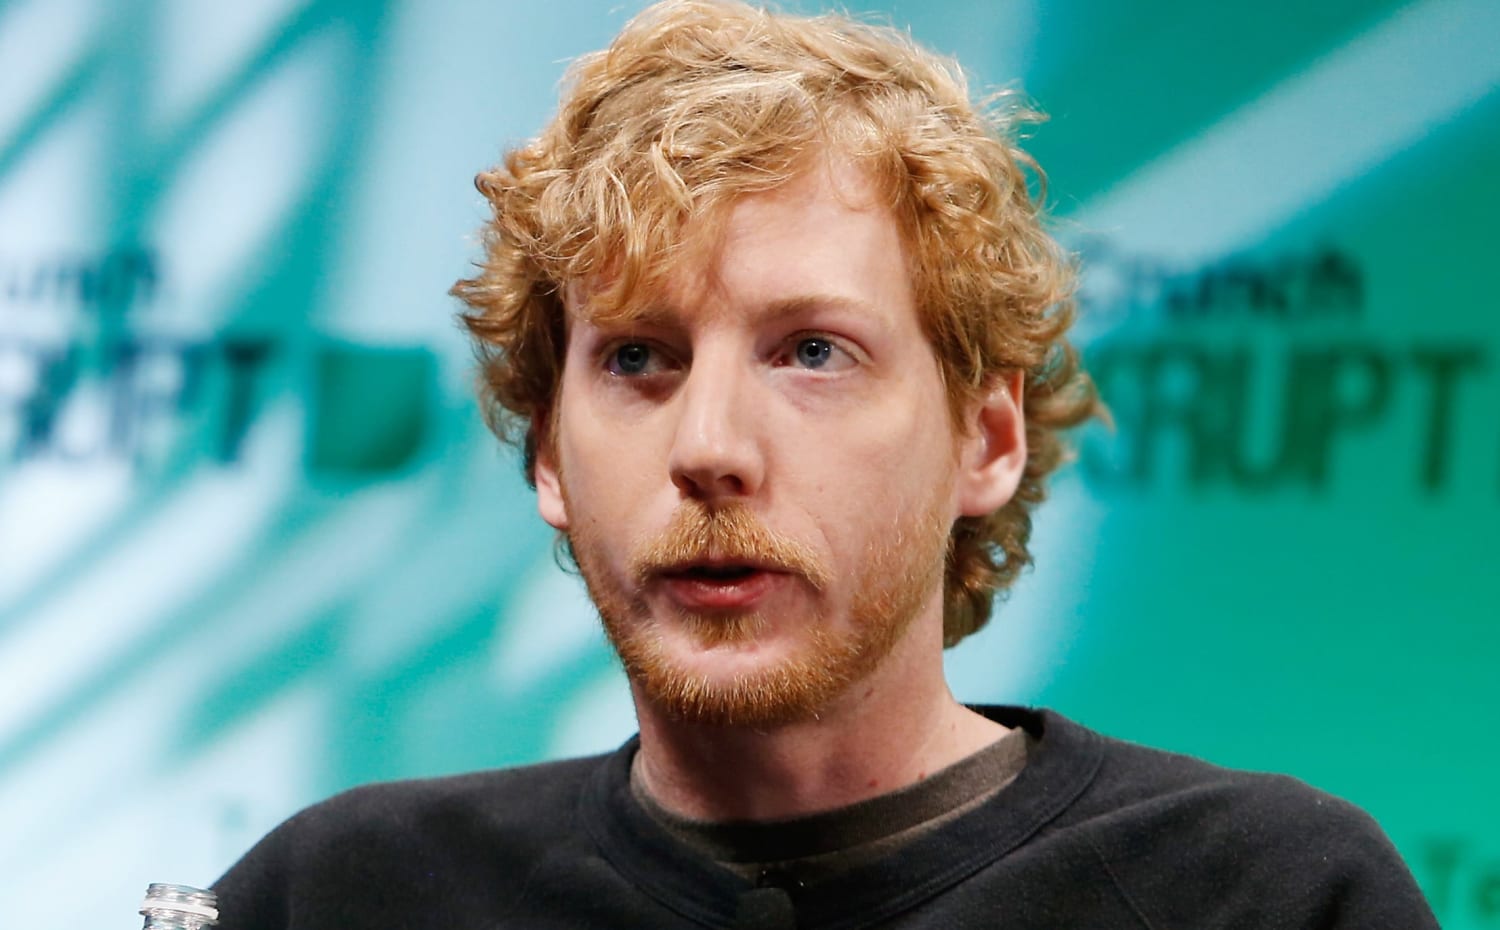 How this 33-year-old college dropout co-founded GitHub, which just sold to Microsoft for $7.5 billion